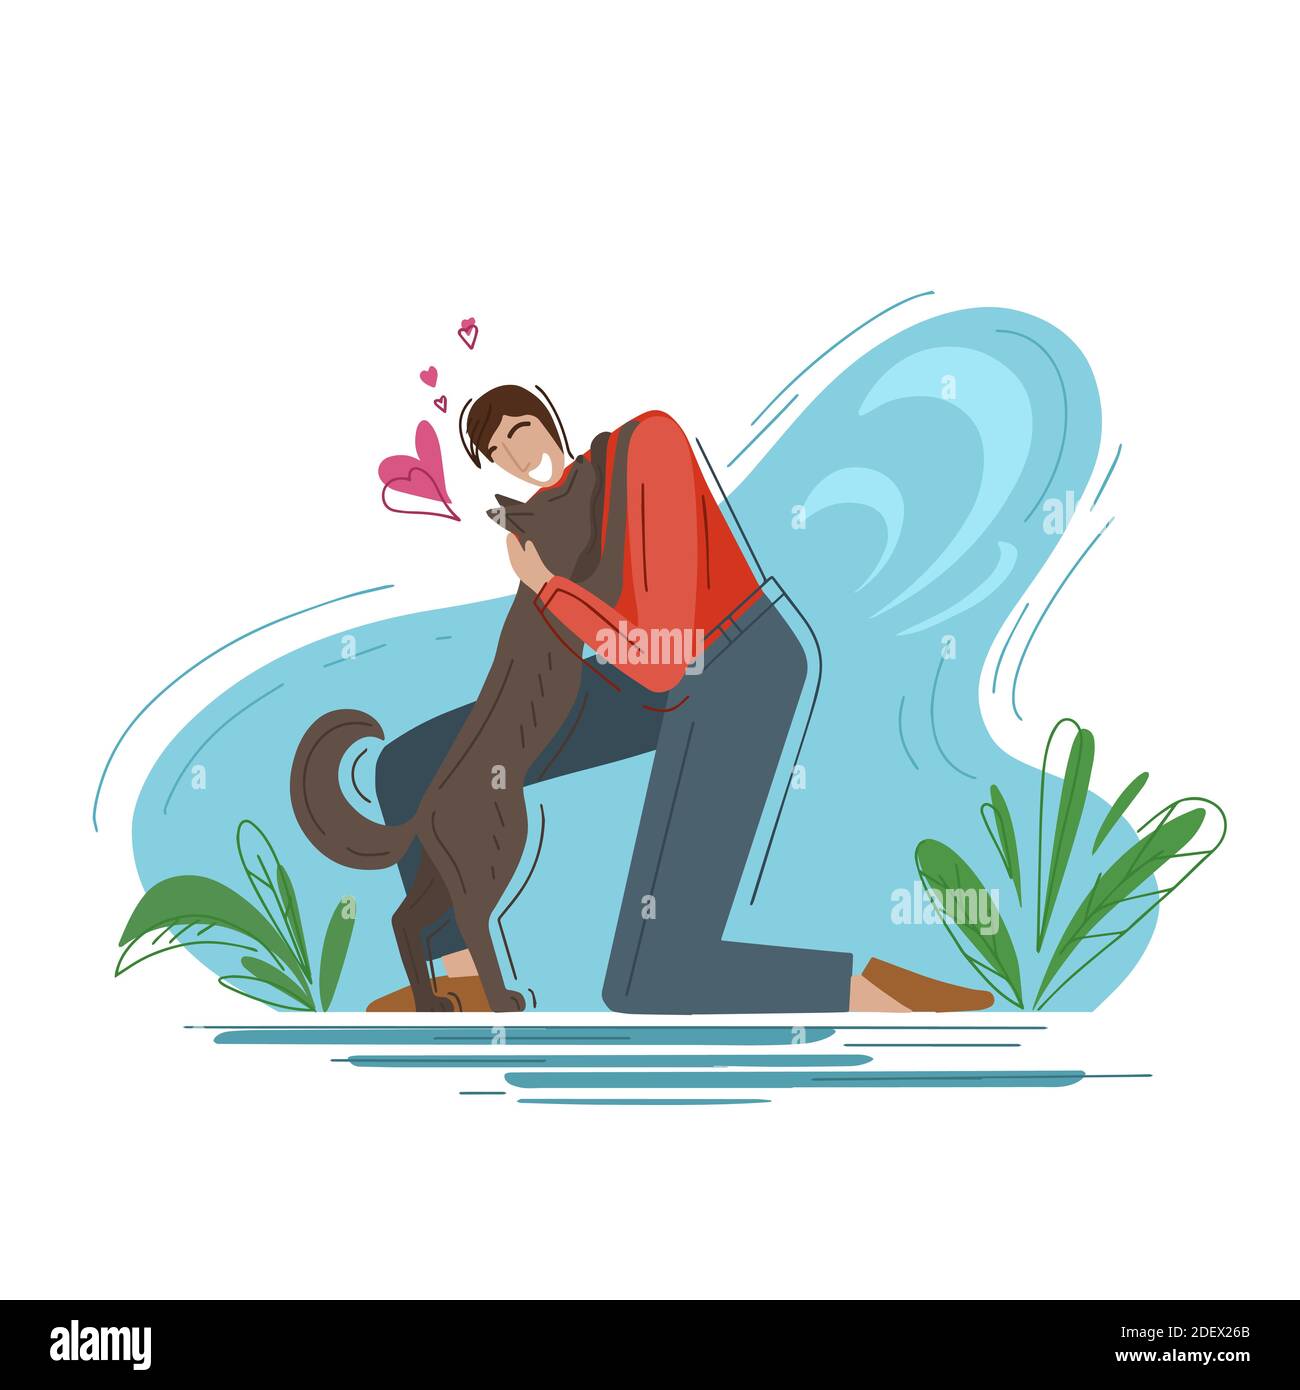 Love for pets. Trendy fashion illustration. Joyful man hugging a dog on an abstract background. Helping homeless animals. Vector flat illustration for Stock Vector